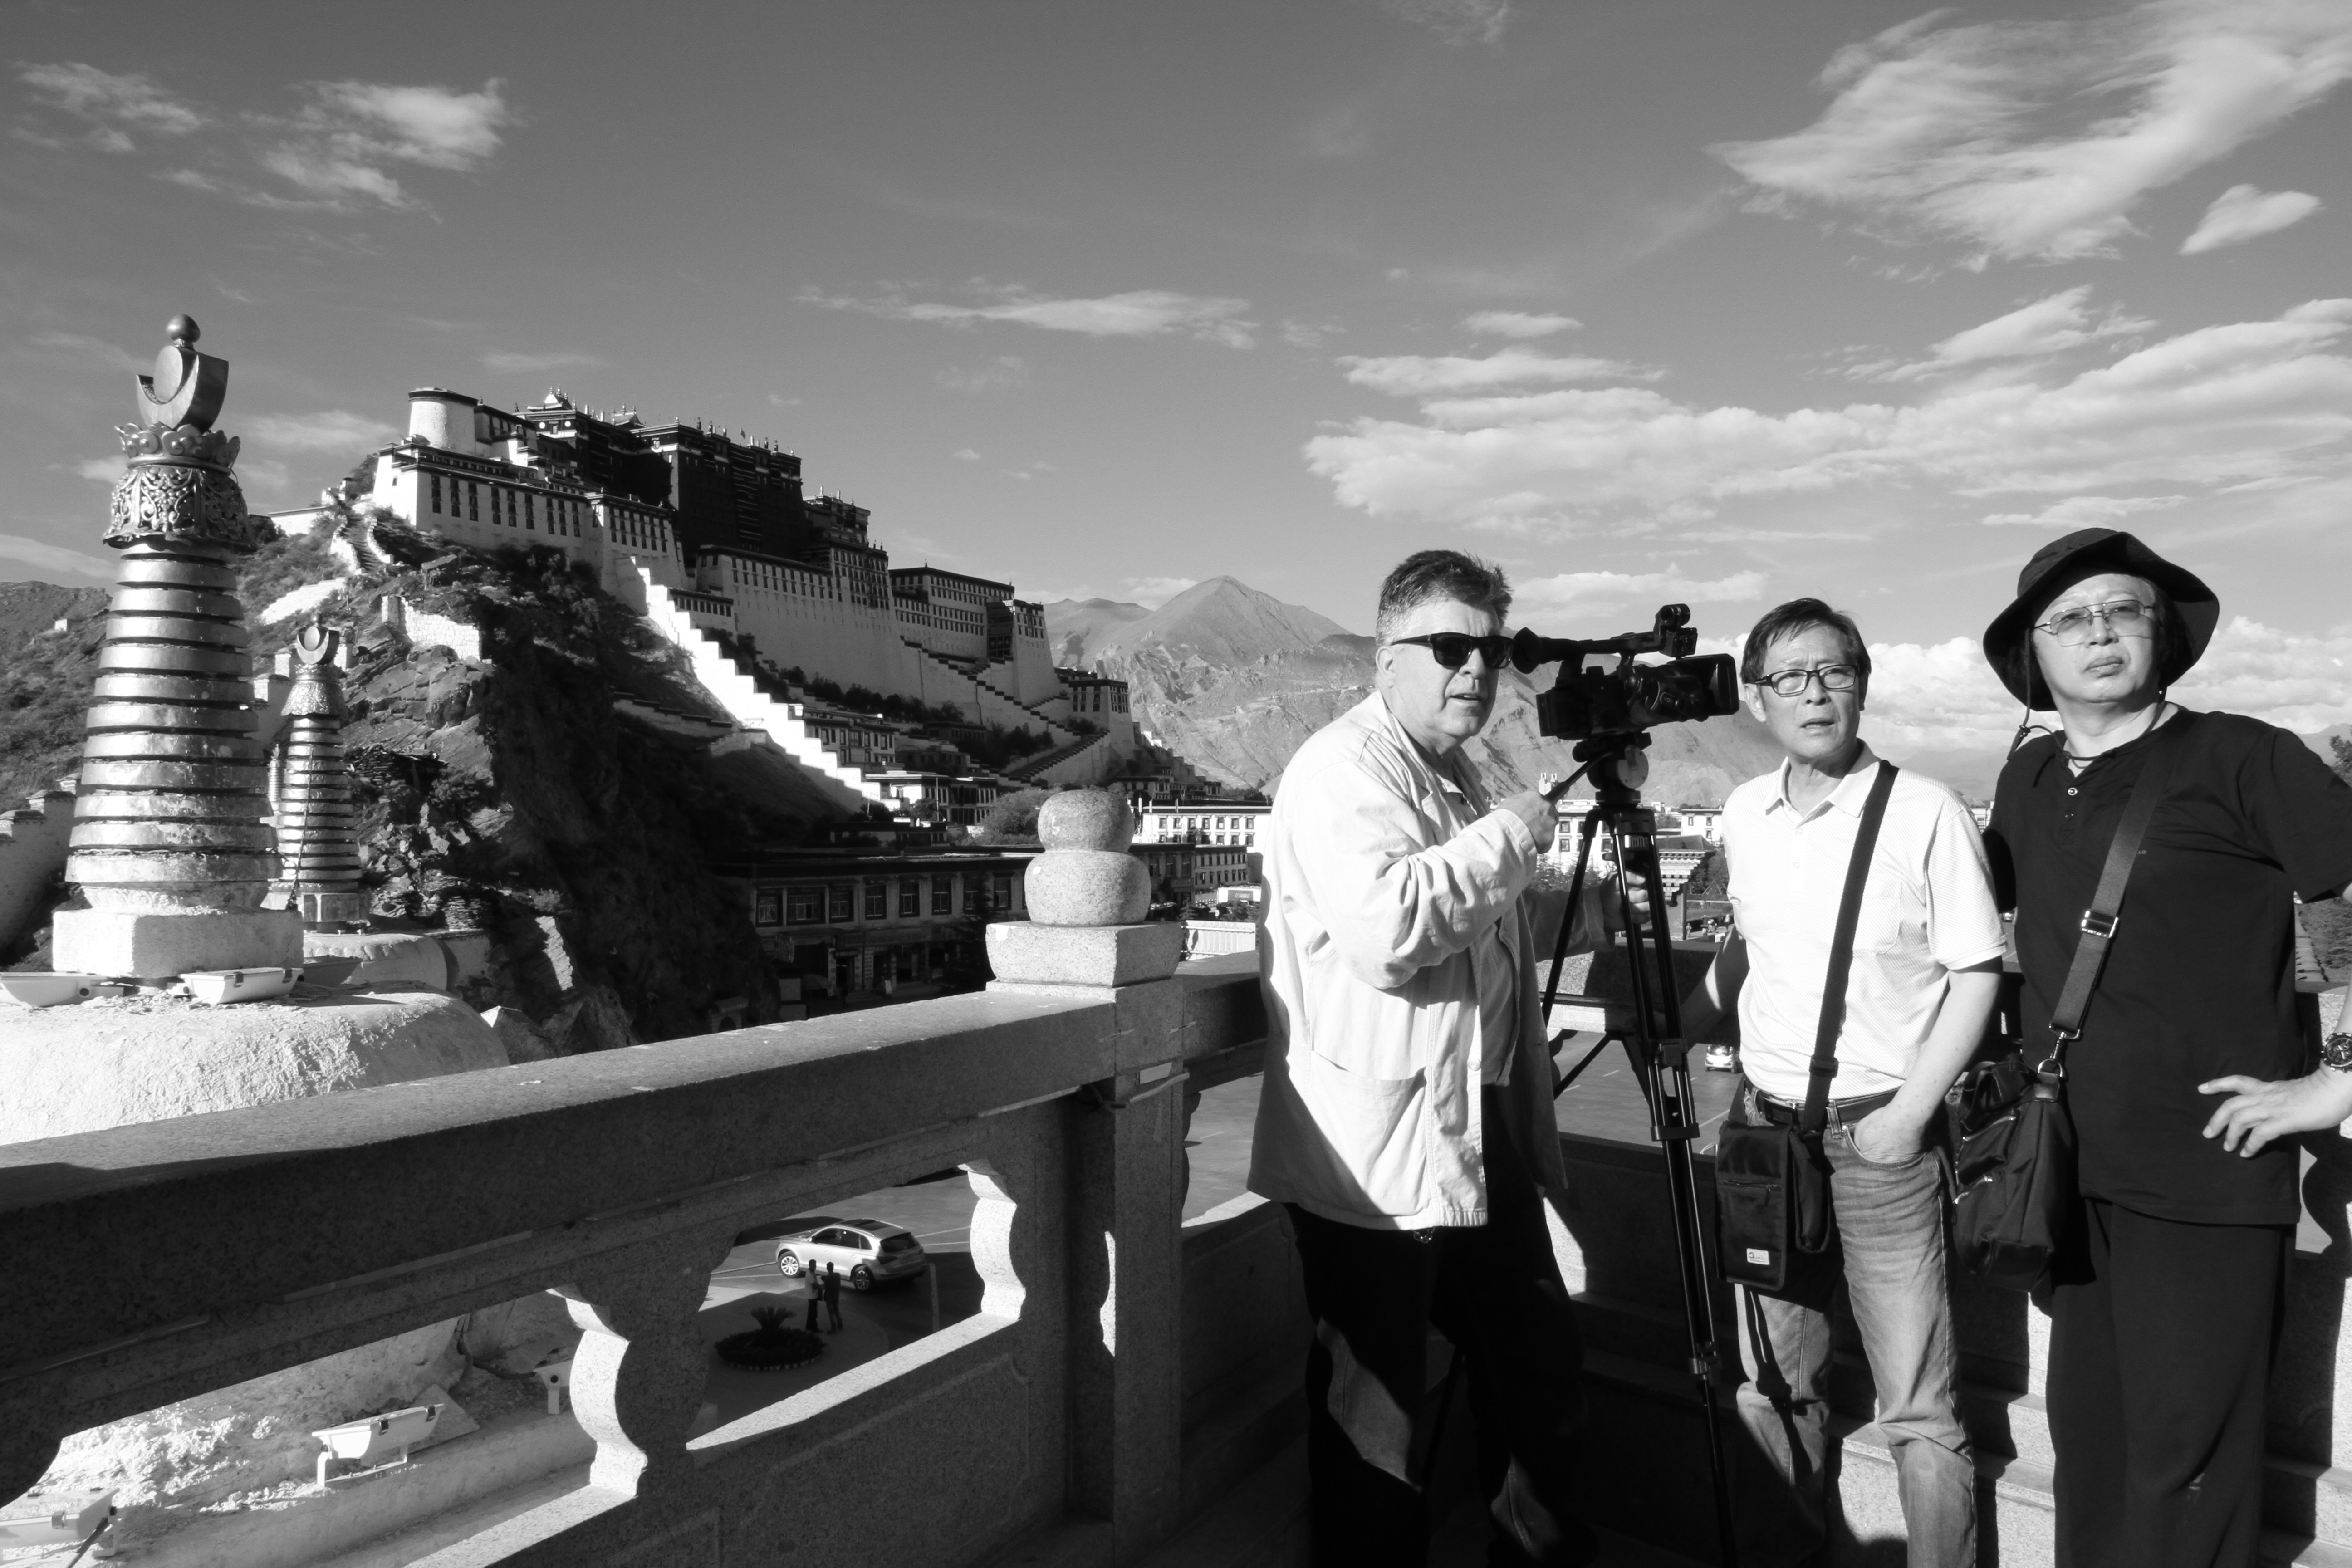 Potala Palace - Lhasa, Tibet. With Director/Novelist Qiqiang Zhao and UPM Yue Jianyi on a location scout.